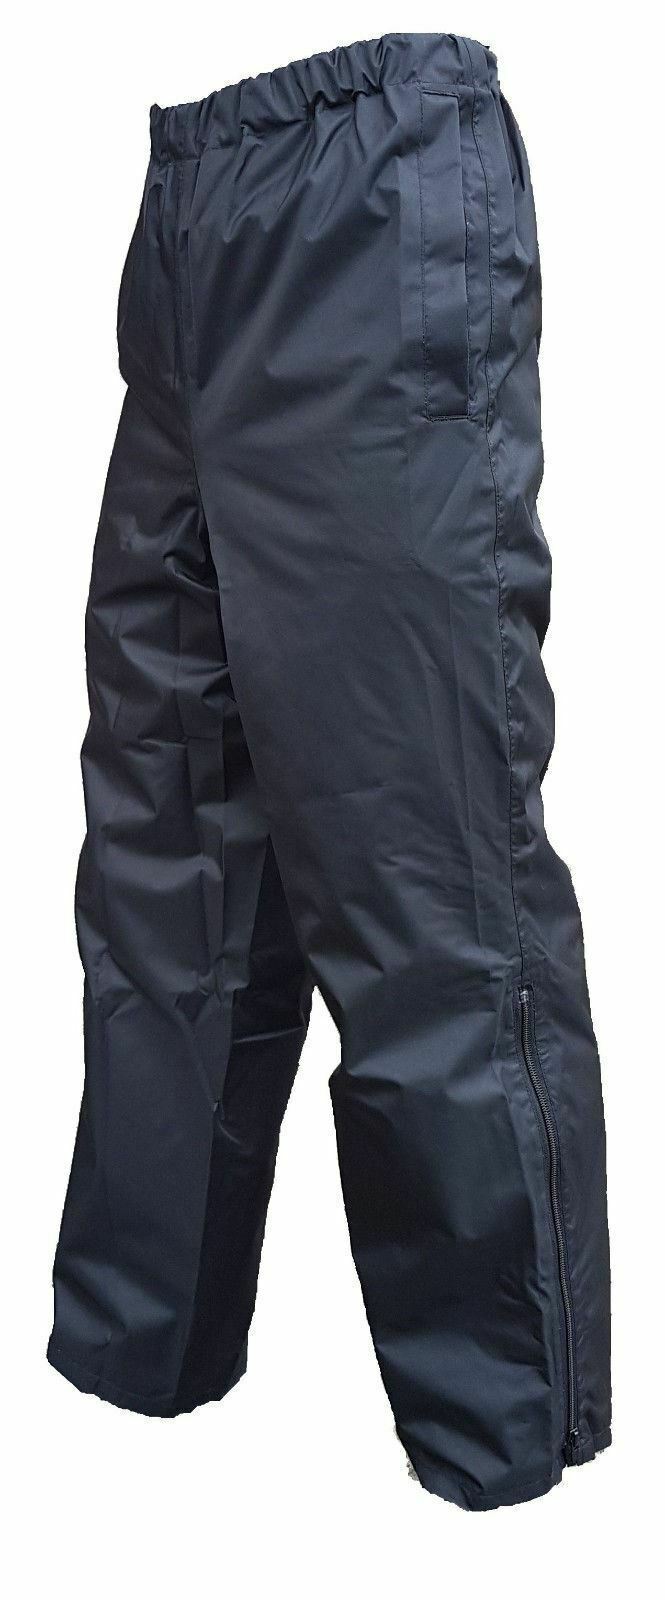 Waterproof Trousers & Over Trousers